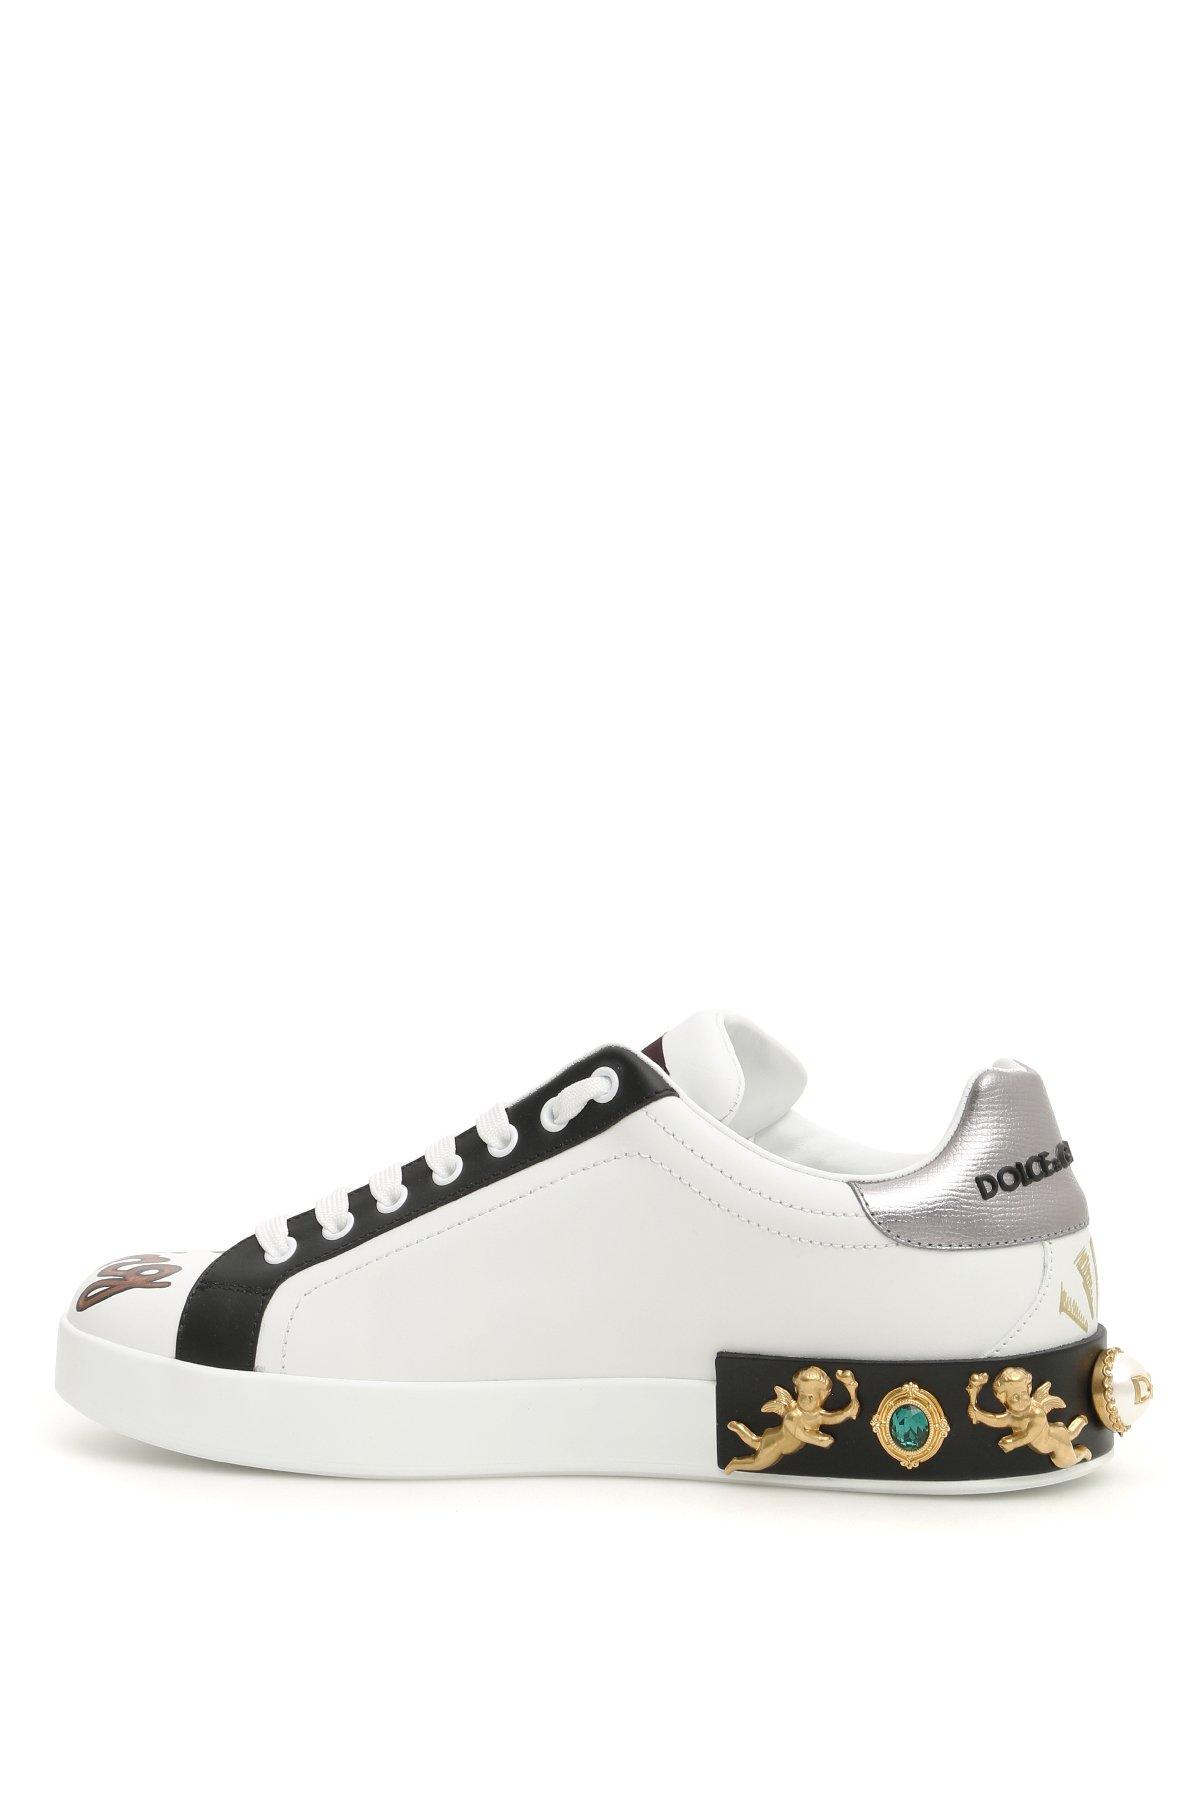 Dolce & Gabbana Leather Amore Patch Sneakers for Men | Lyst